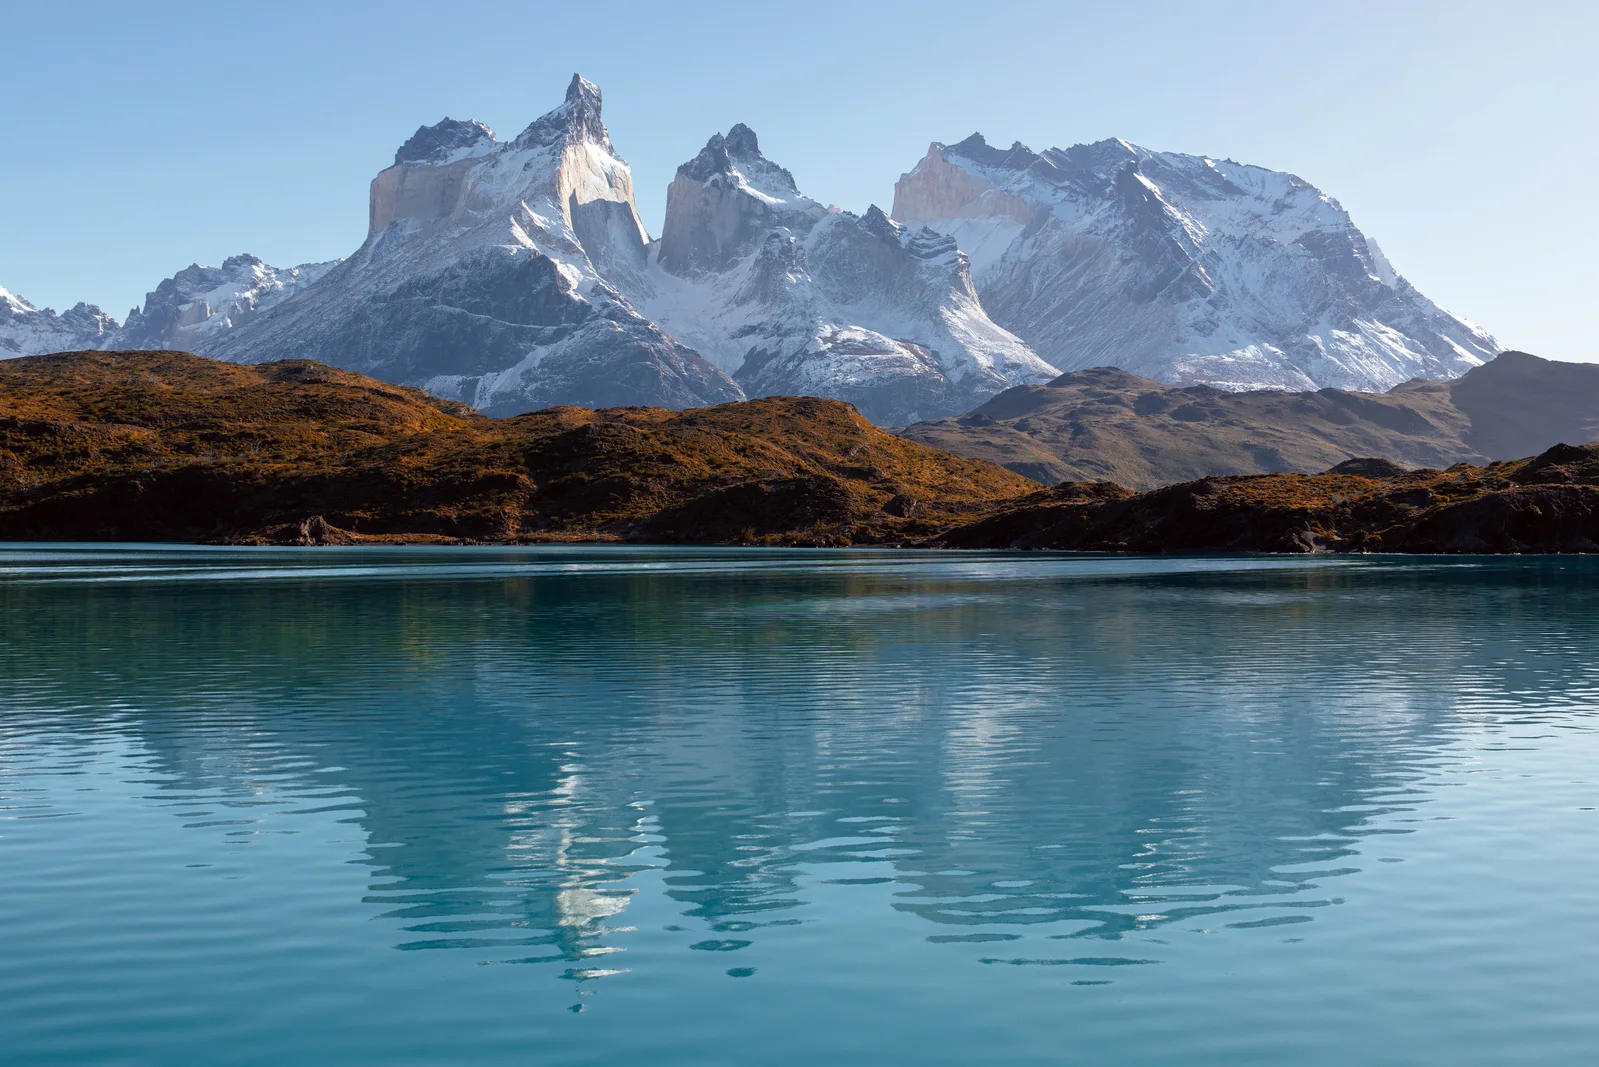 A Guide to the W Trek in Torres del Paine, Chile